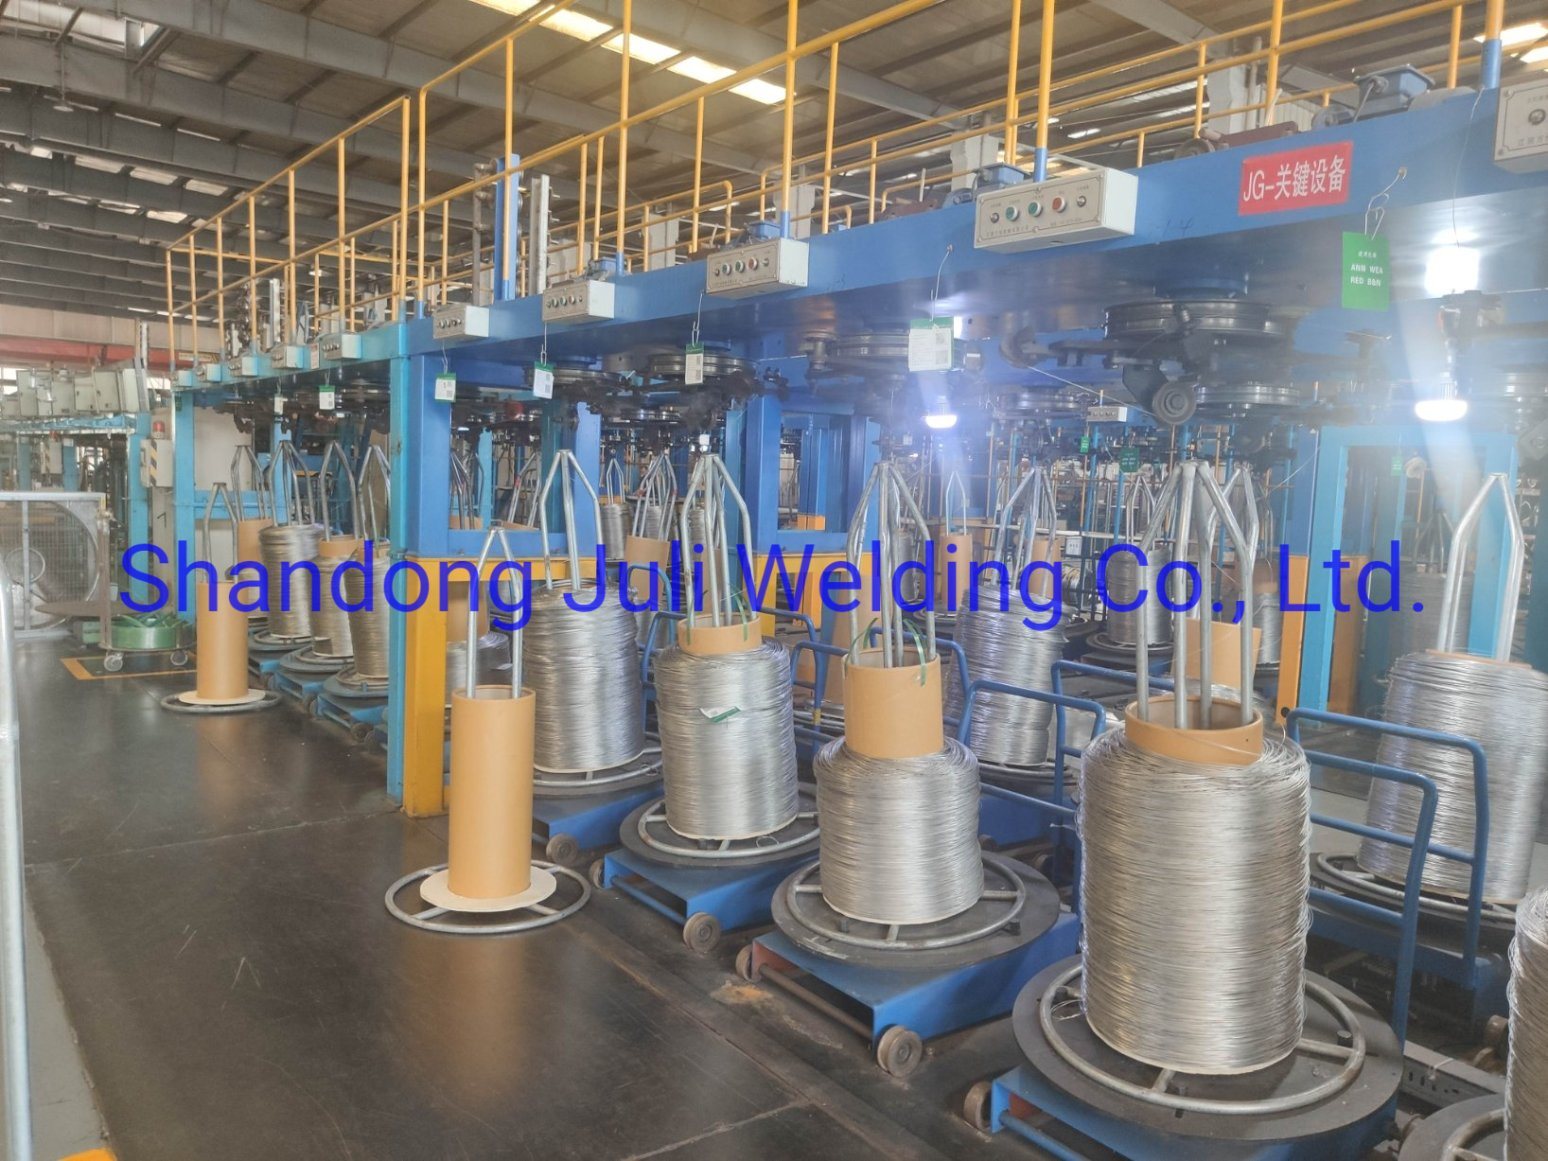 Conveying Net Use High Speed and Strength Quality Low Price Smooth Stainless Steel Wea Stainless Steel Weaving, Braiding Wire